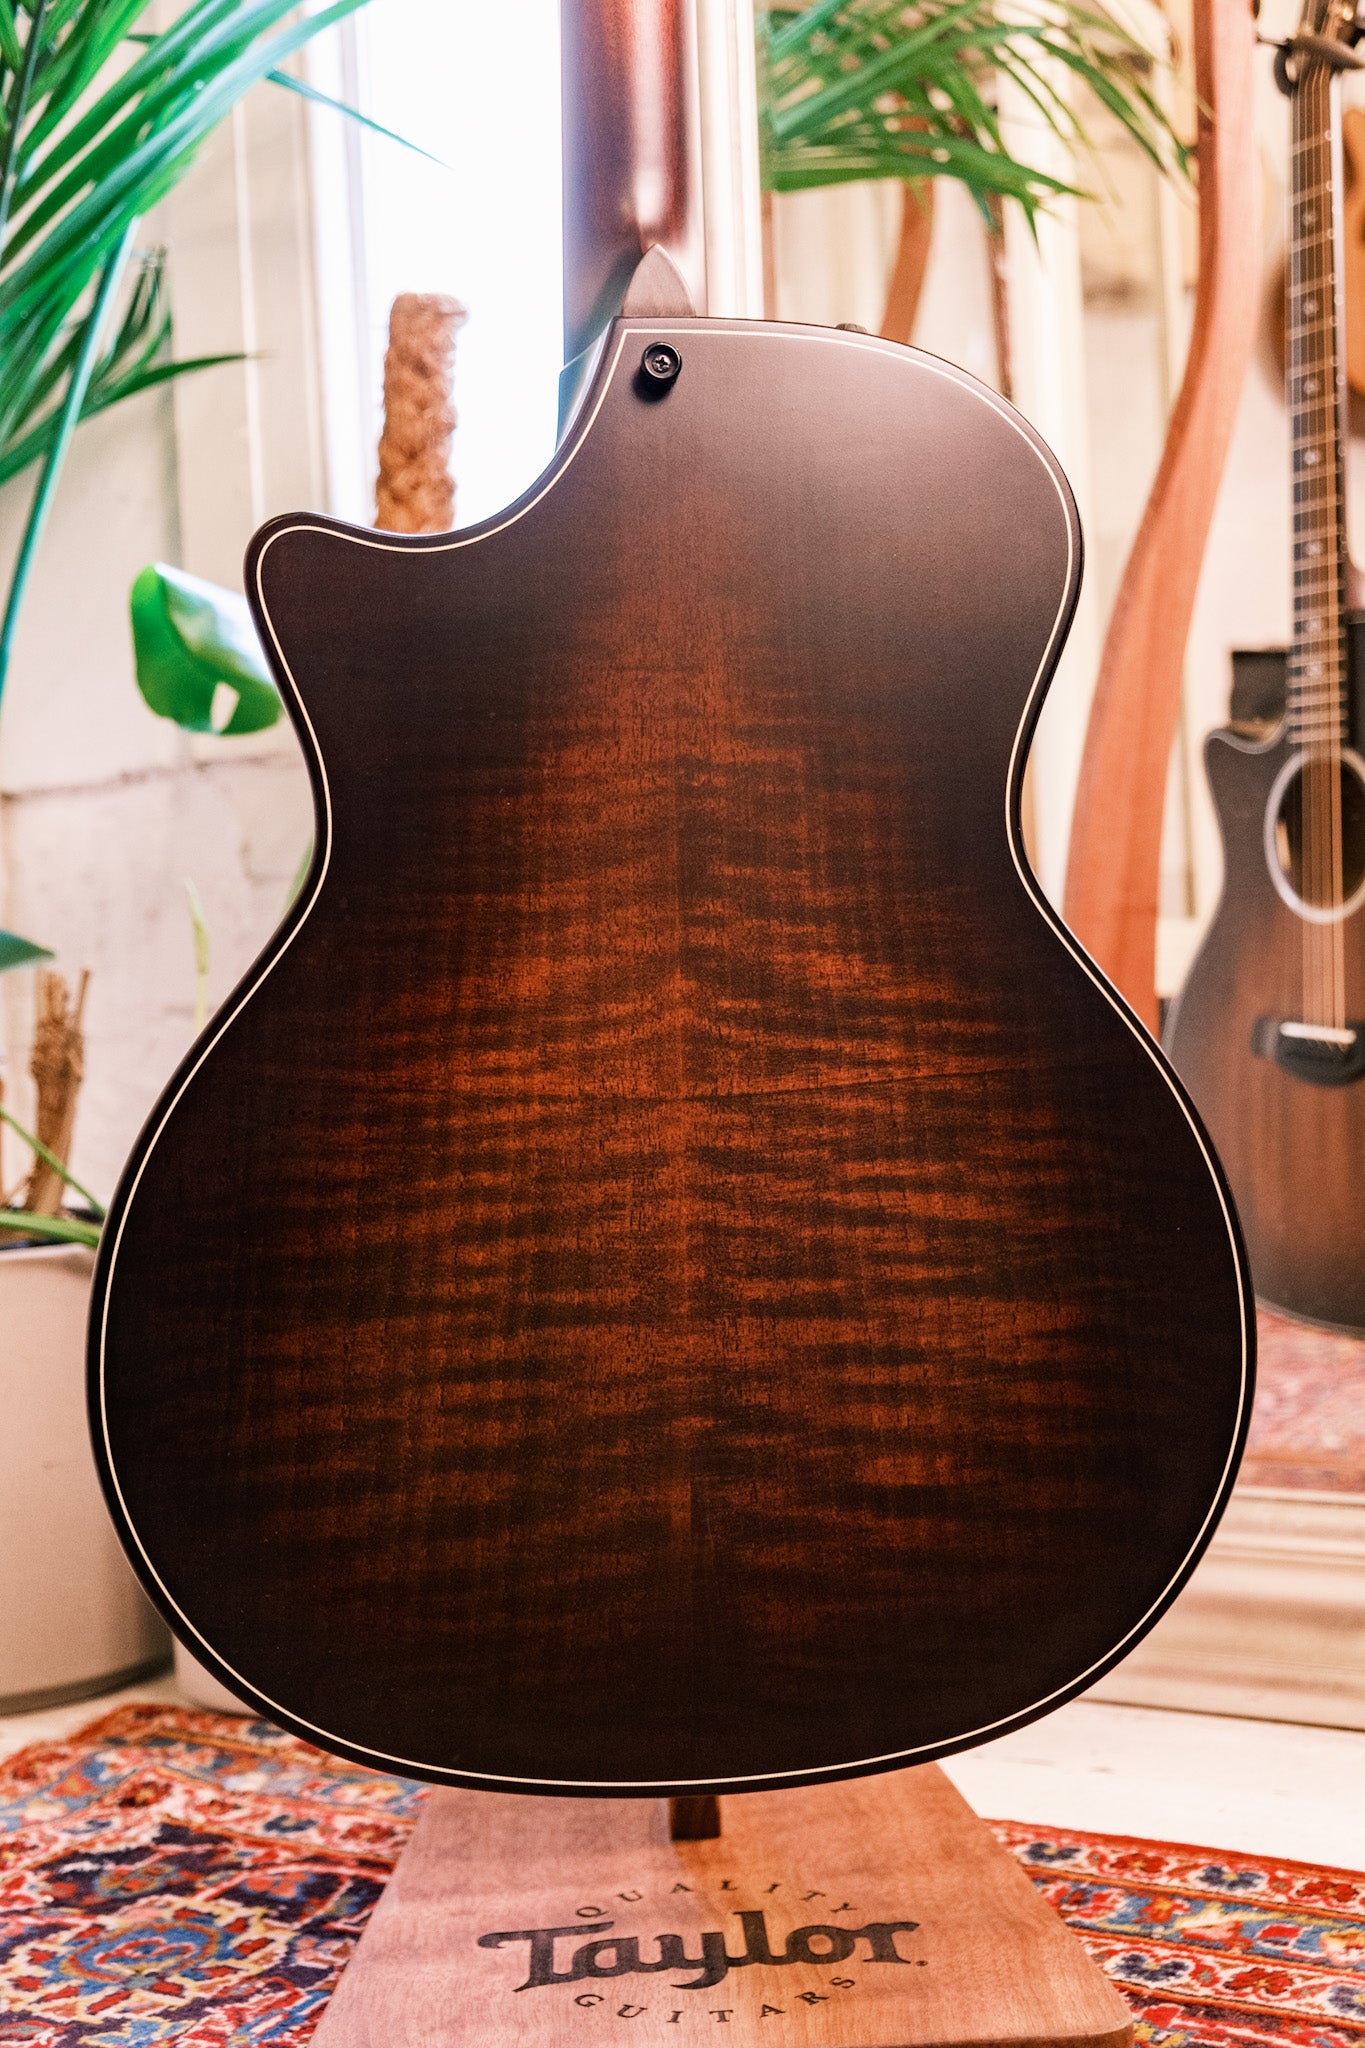 Taylor 324ce Builder's Edition